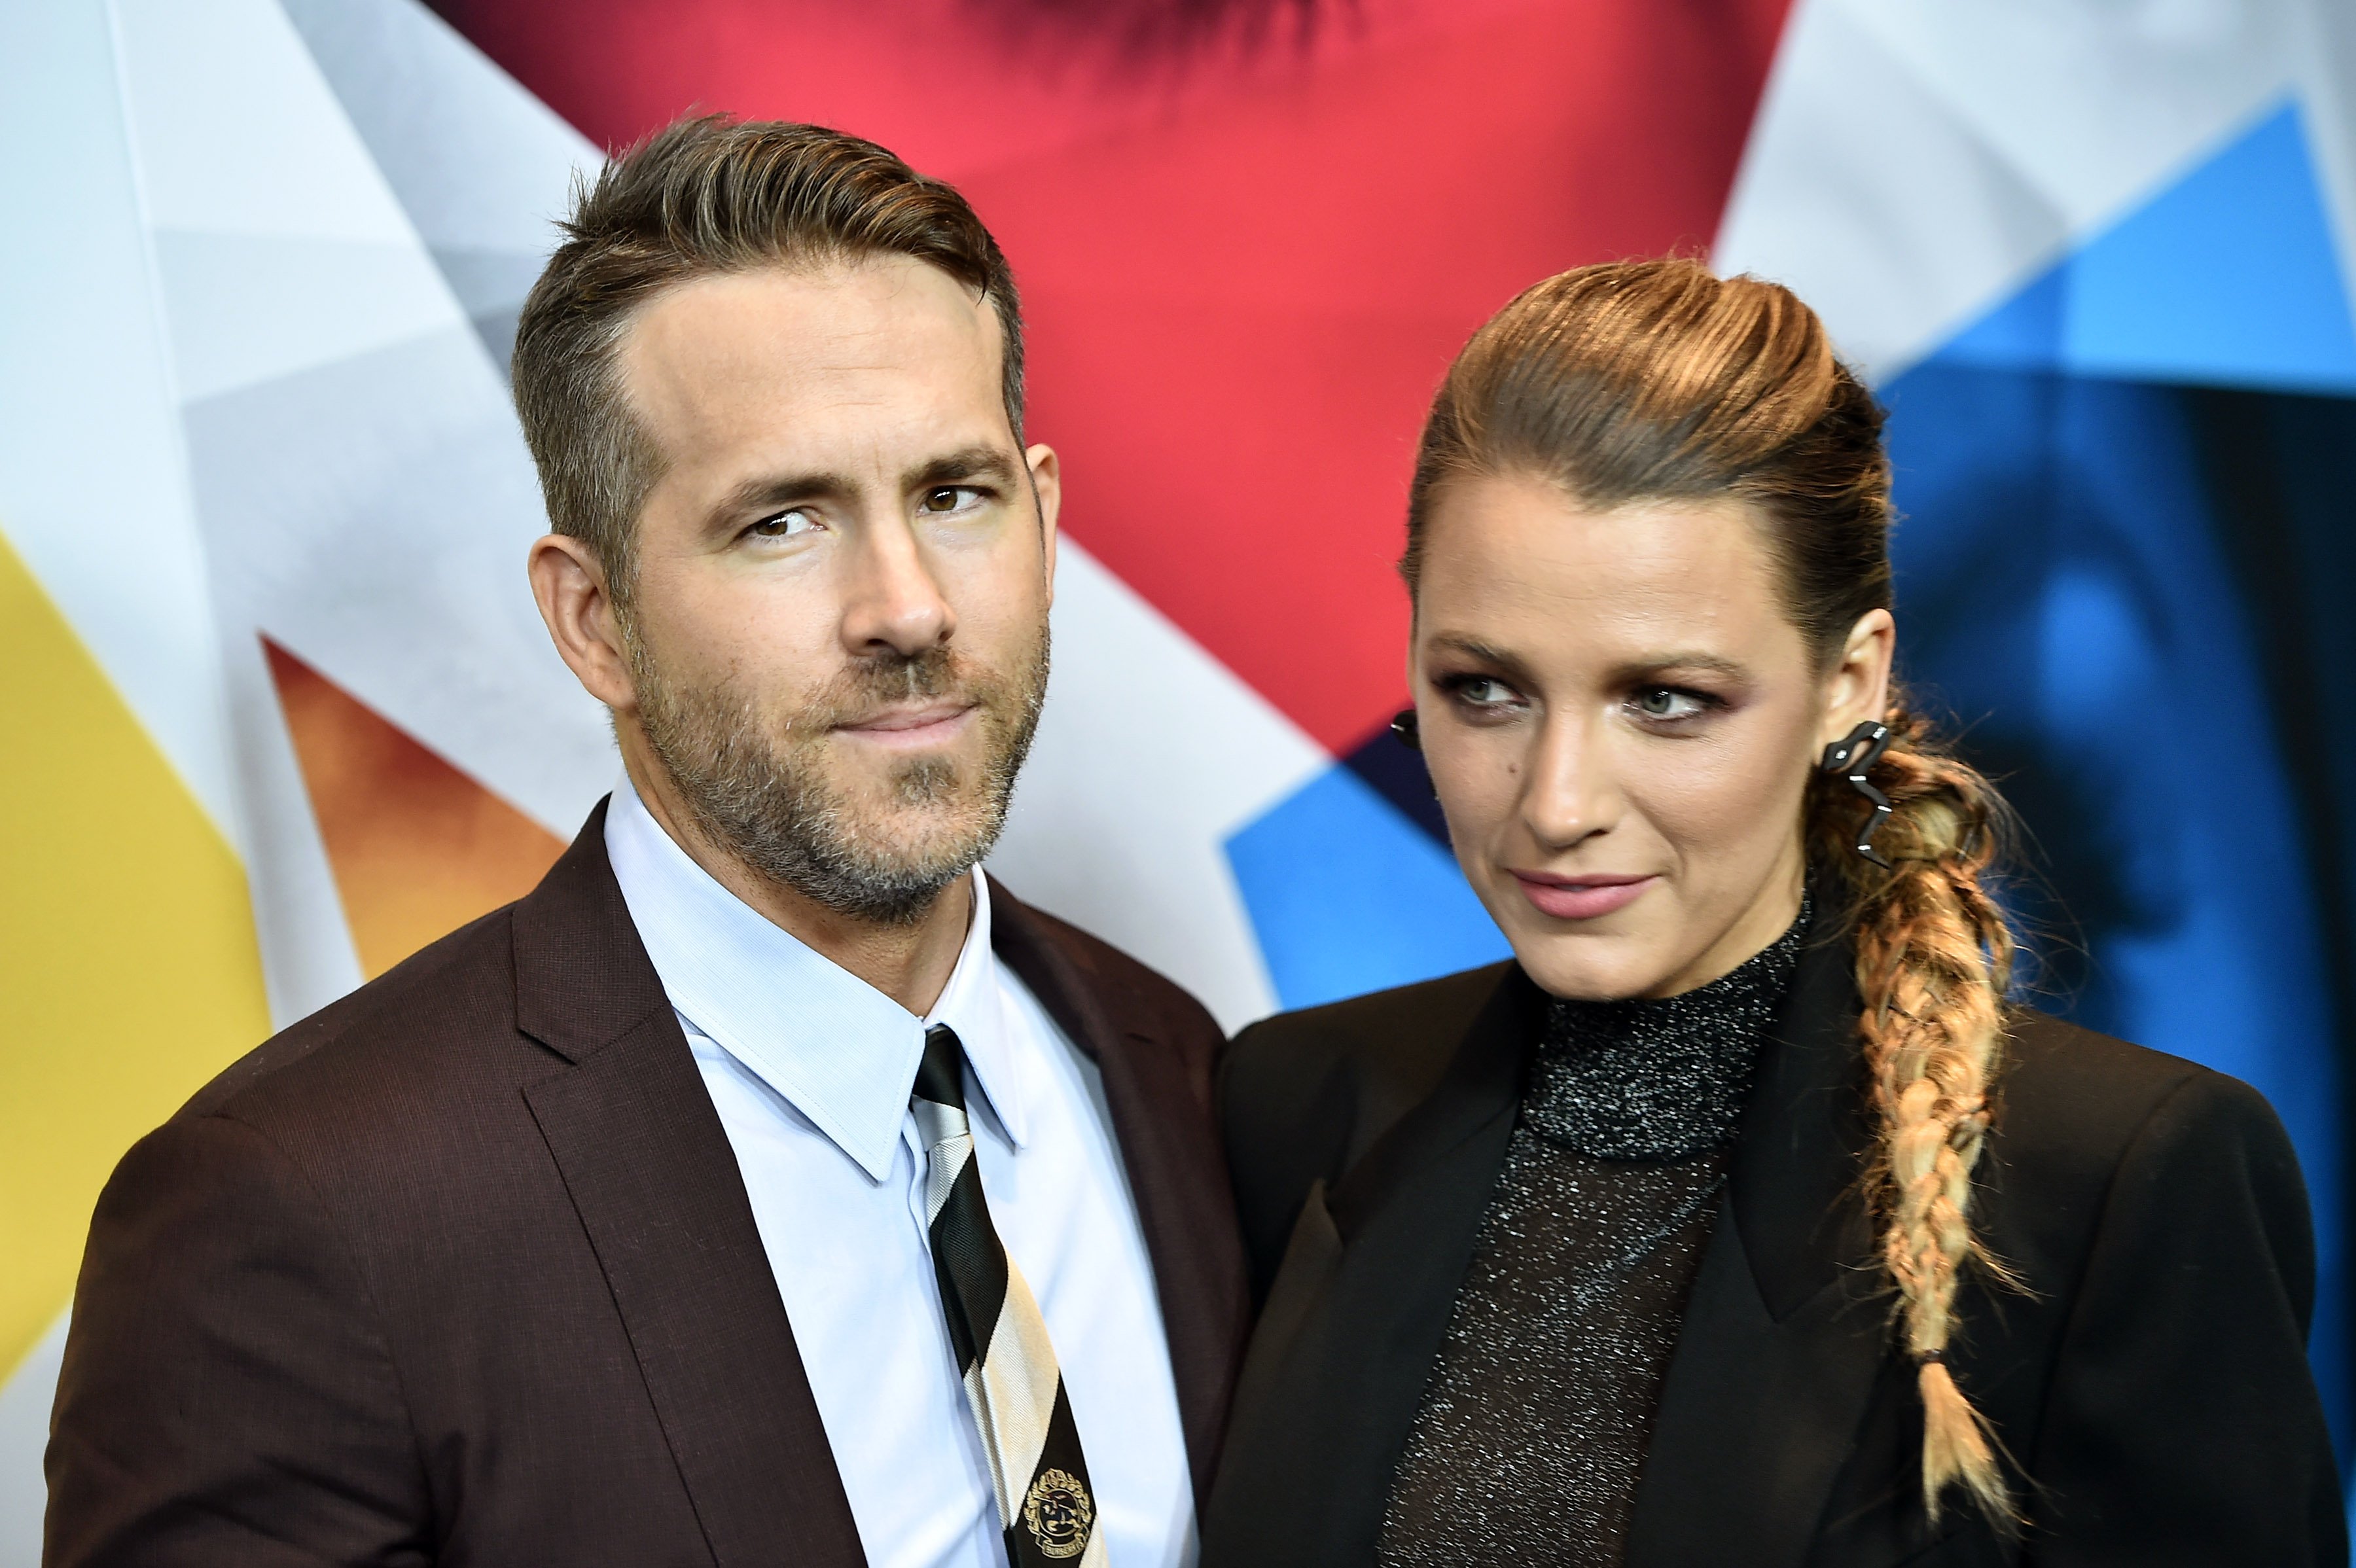 Ryan Reynolds and Blake Lively attend the premiere of "A Simple Favor" in New York City on September 10, 2018 | Photo: Getty Images